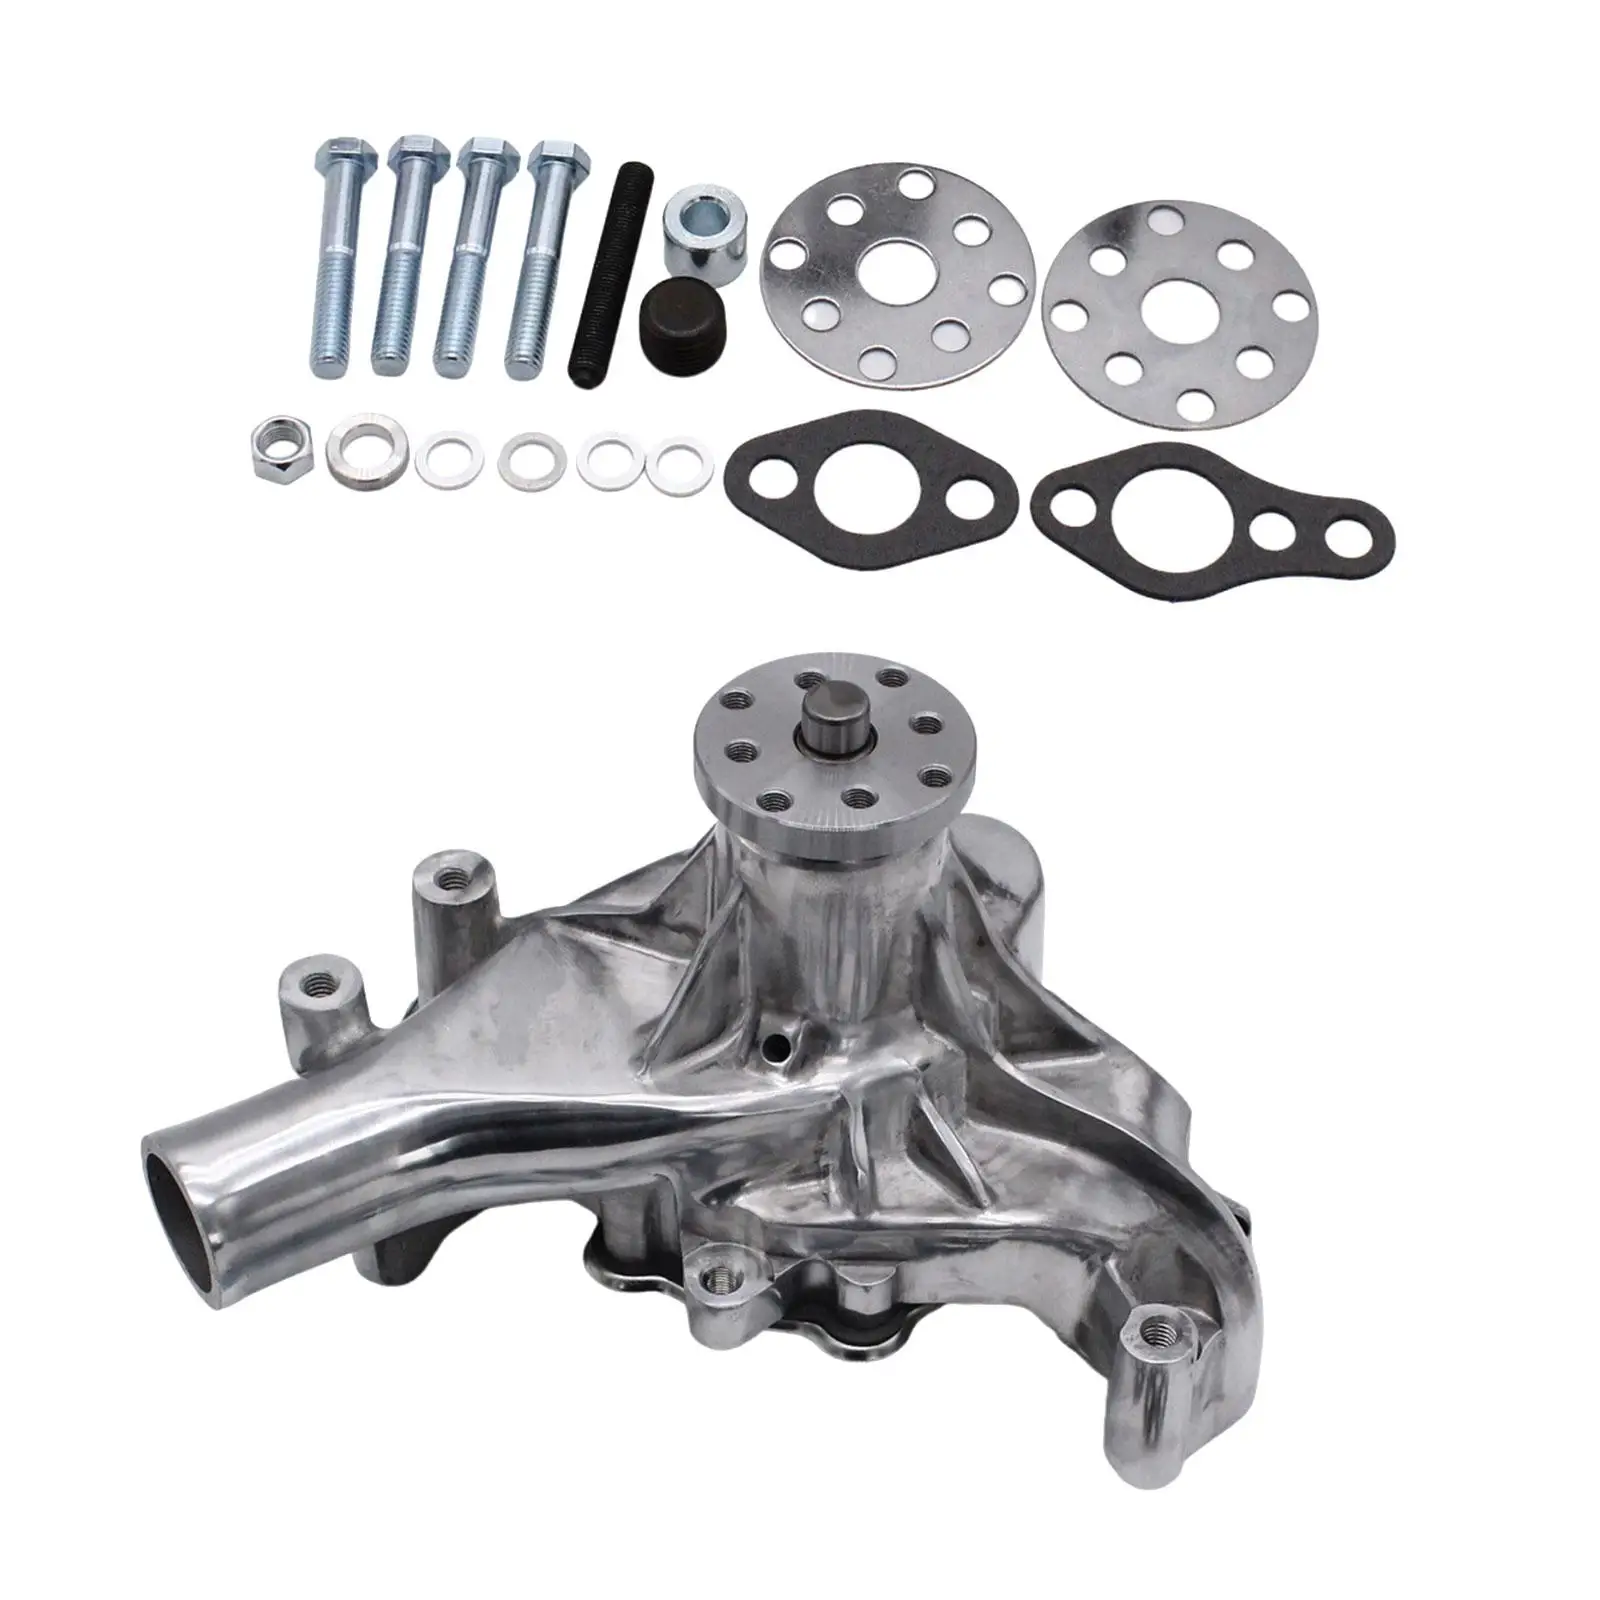 Water Pump Long Chrome Spare Parts Automobile for Chevy 283 327 350 383